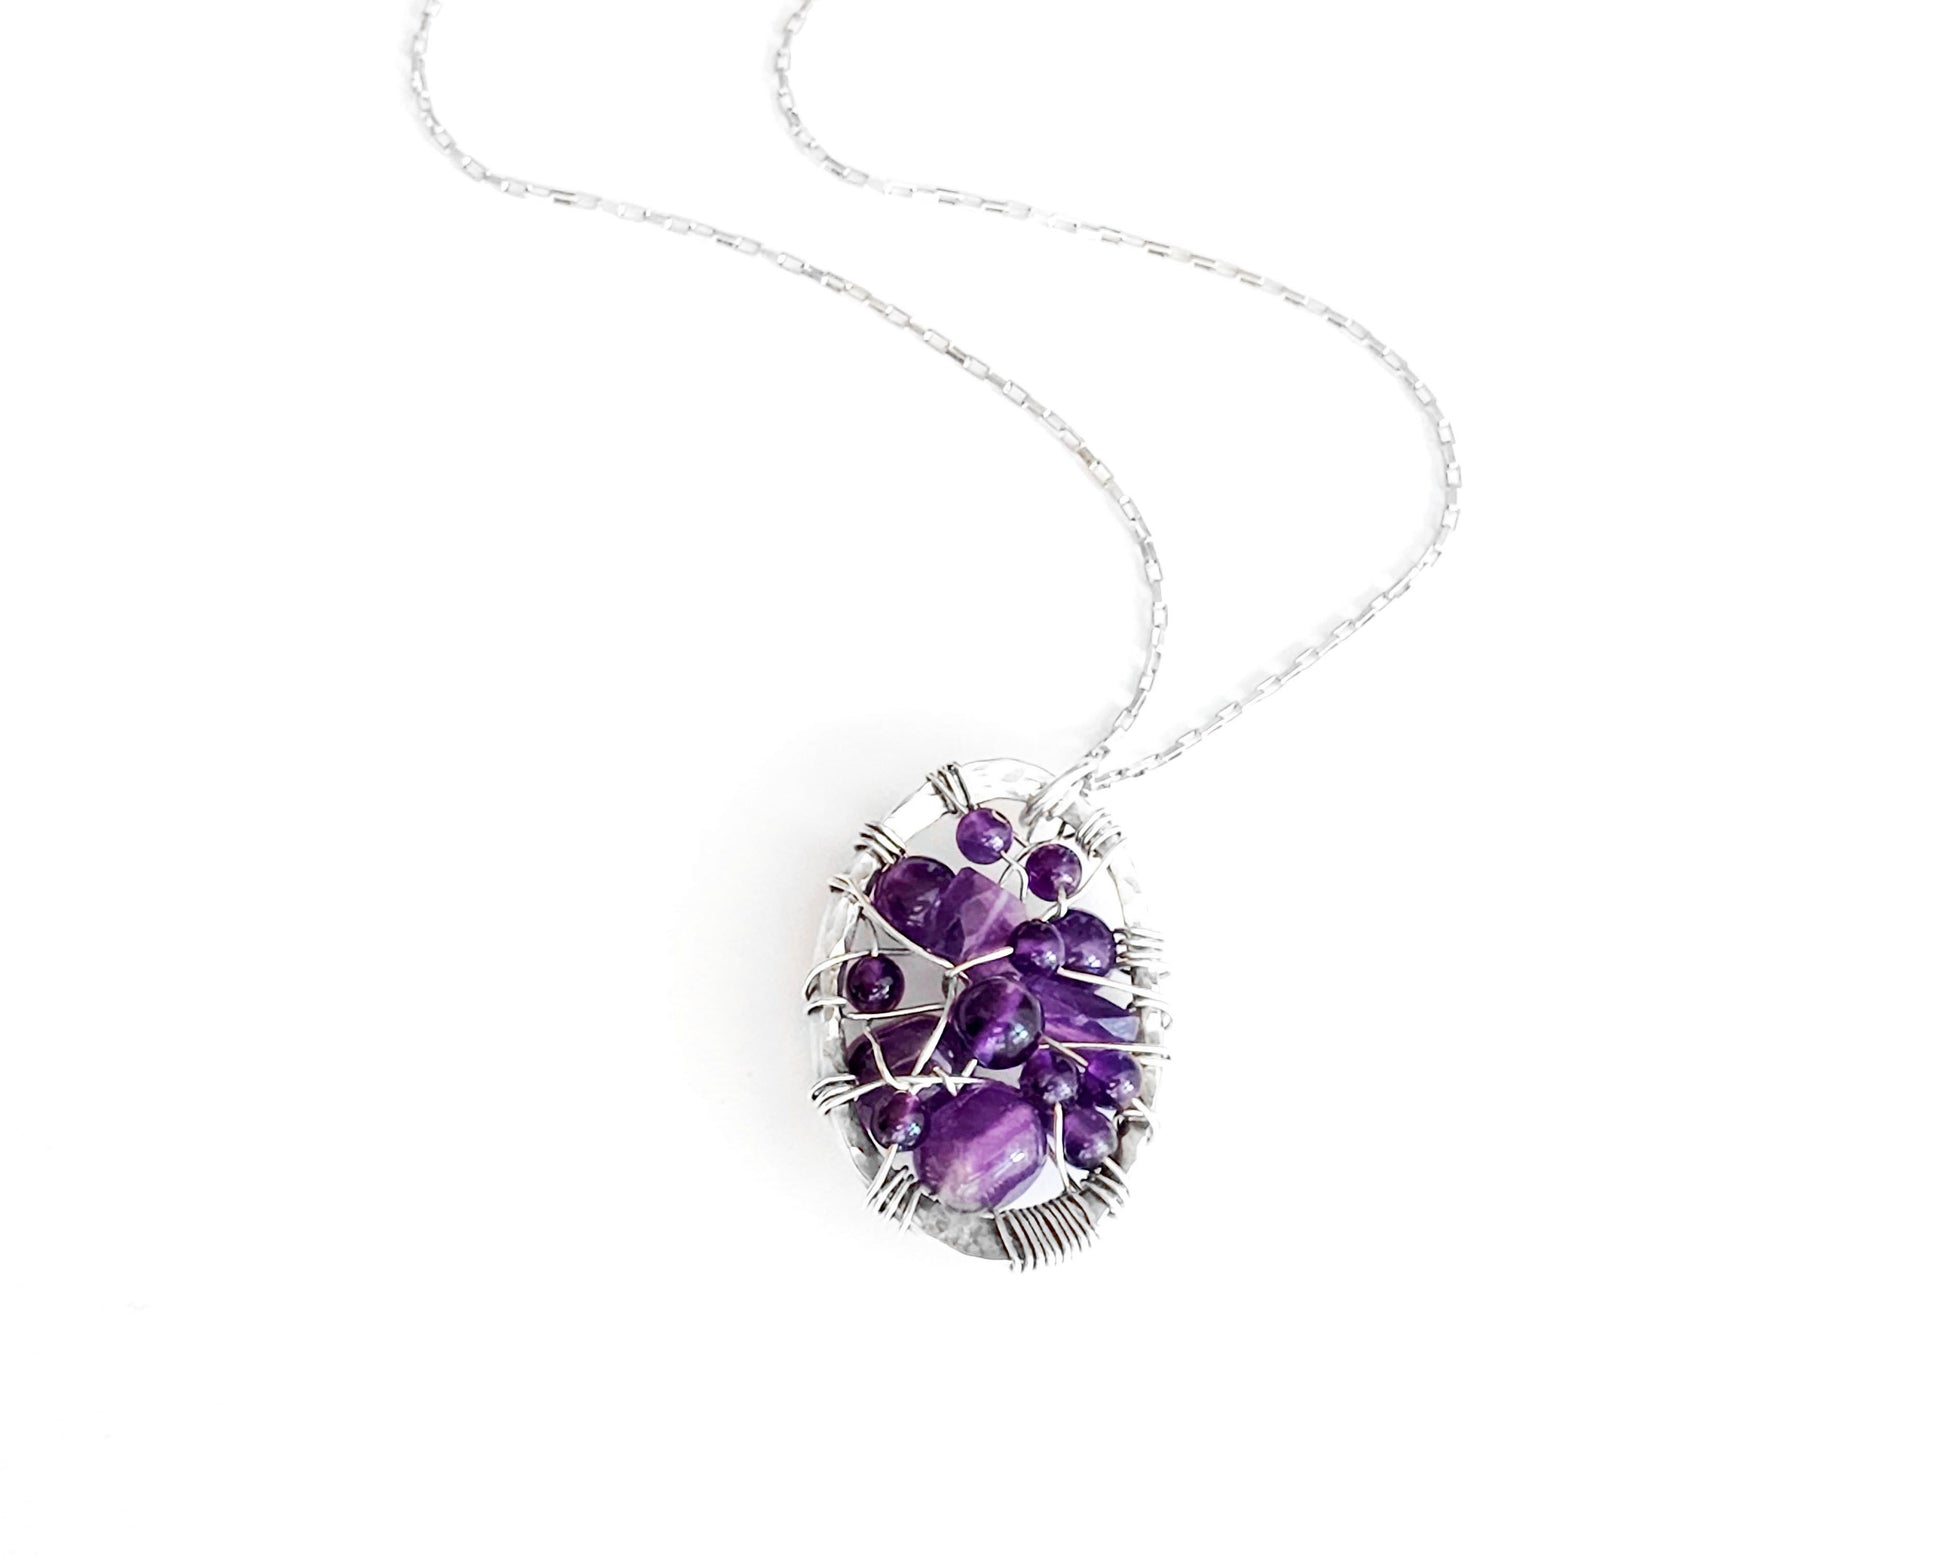 Oval shaped Sterling Silver Amethyst pendant woven with purple gemstones and Sterling Silver wire, pendant on chain.